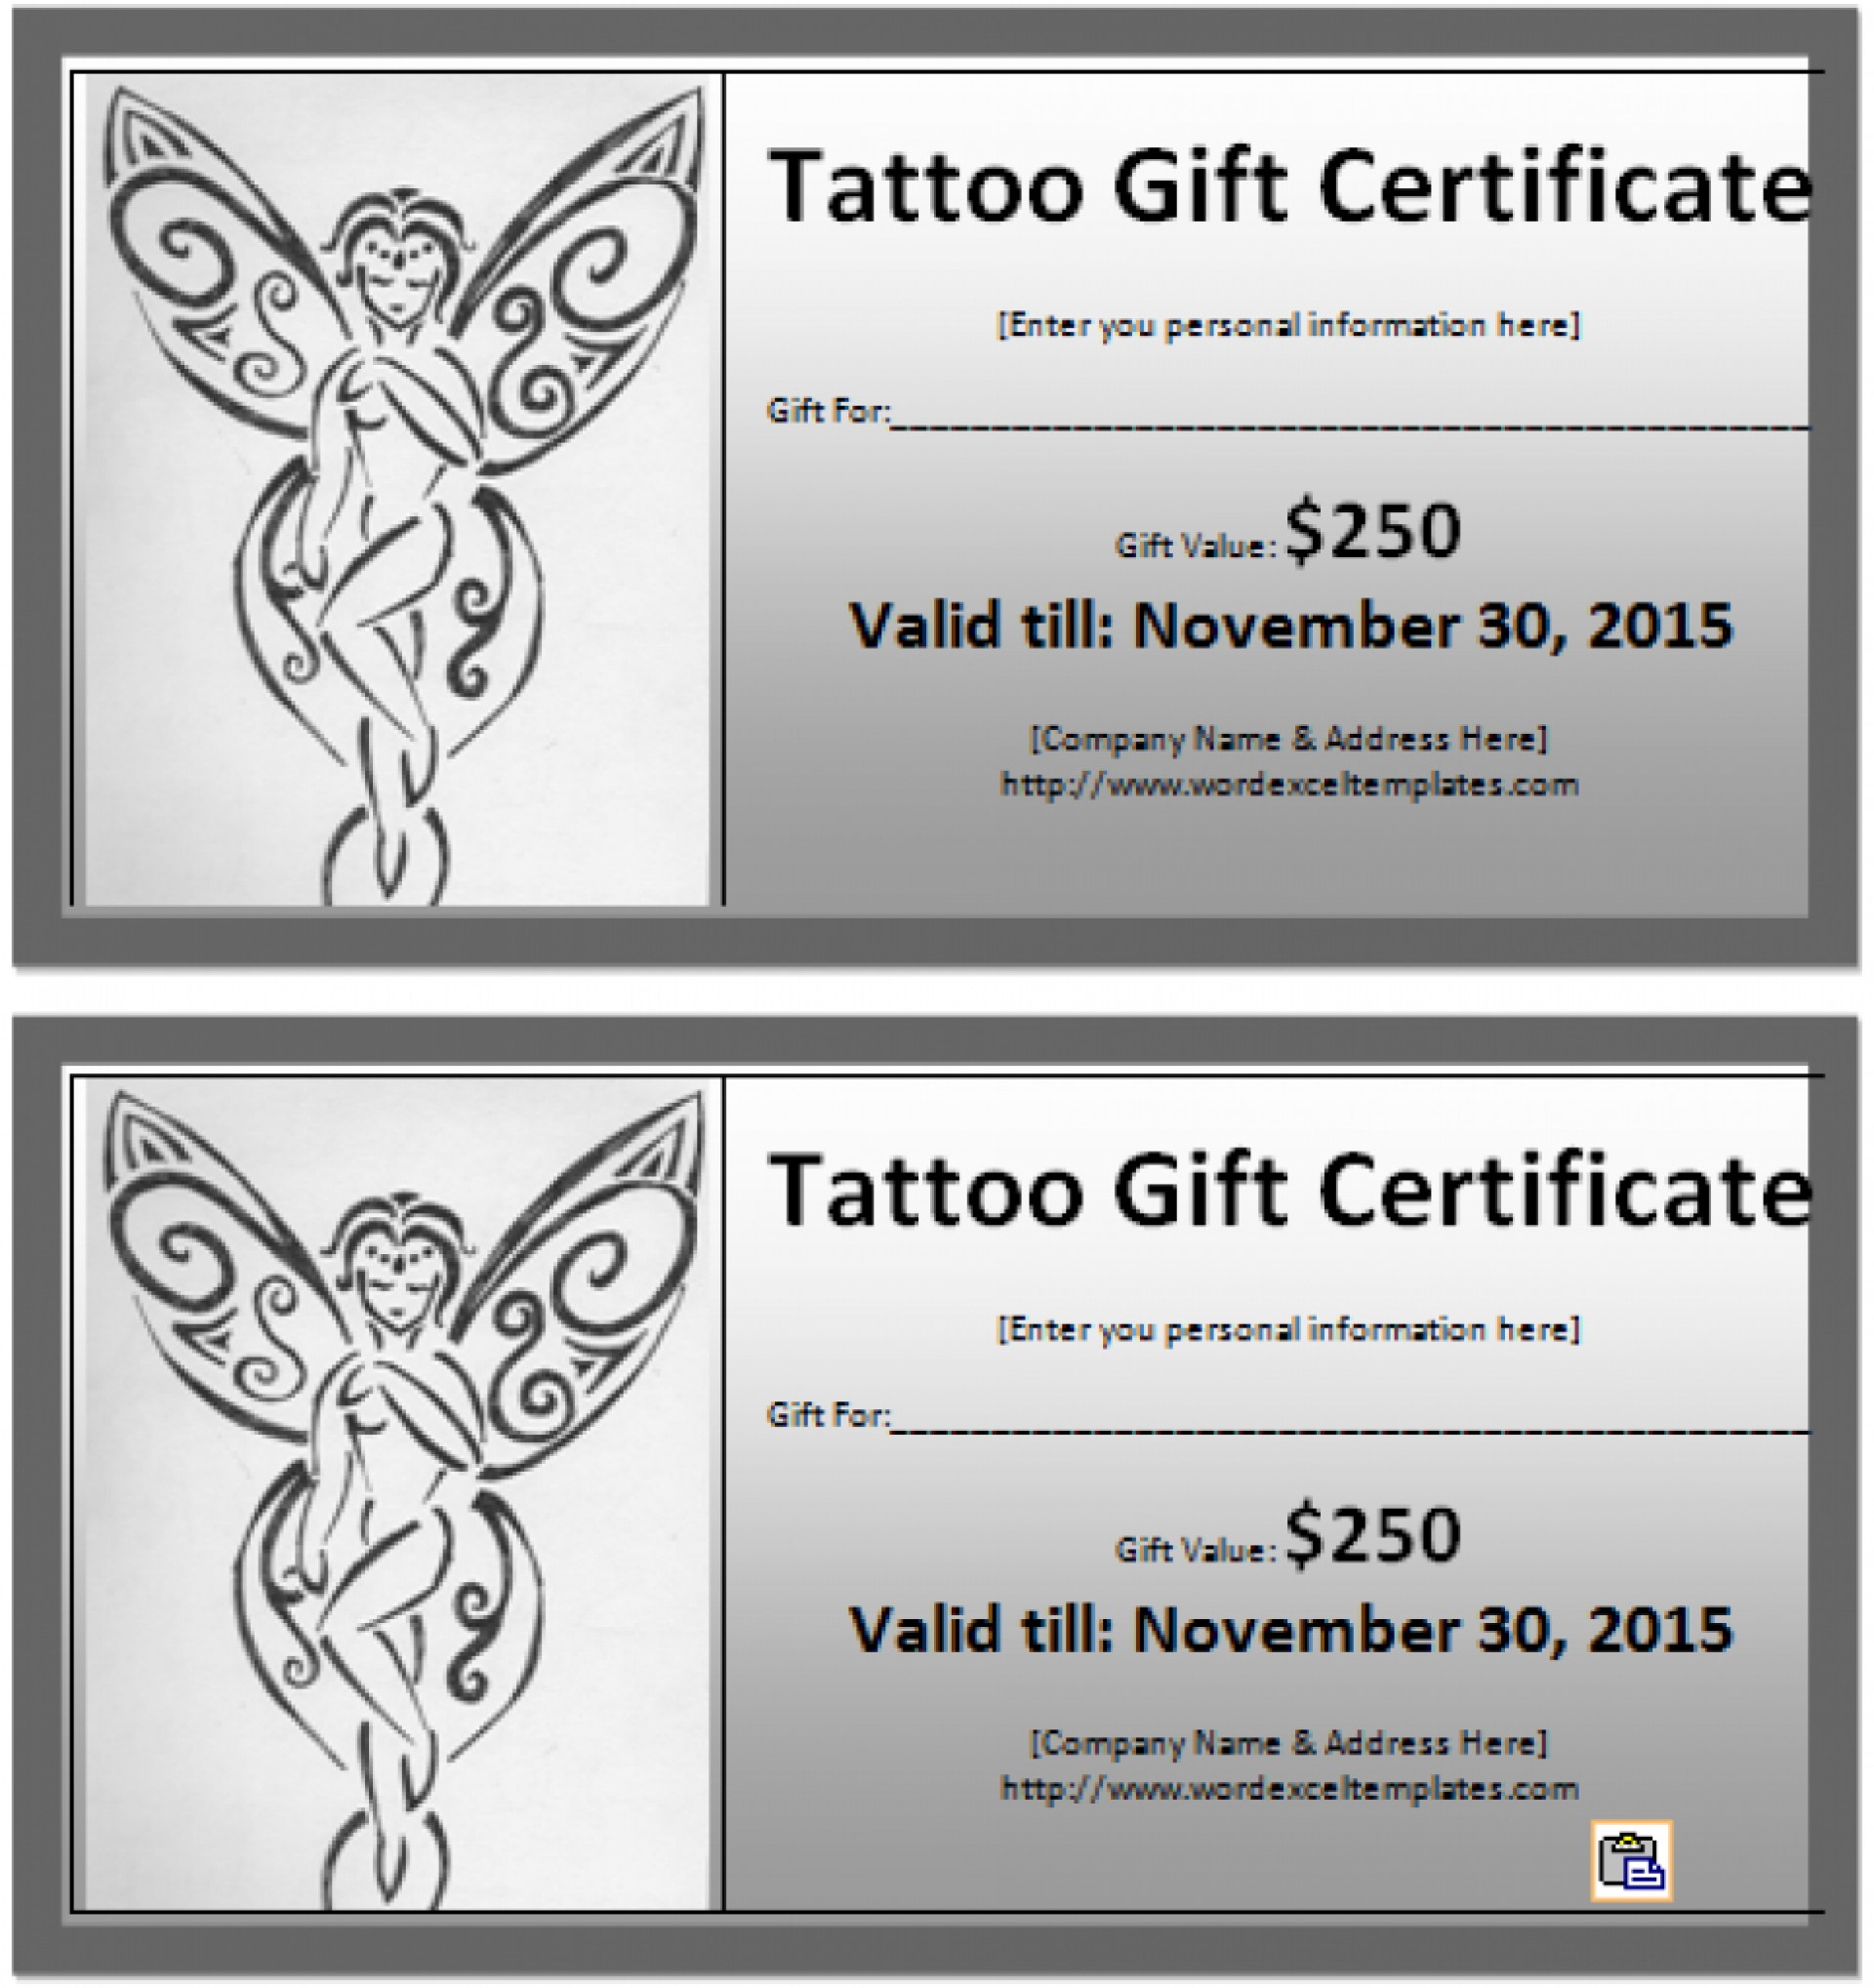 031 Free Printable Gift Certificates Restaurant Ideas Model Within Tattoo Gift Certificate Template